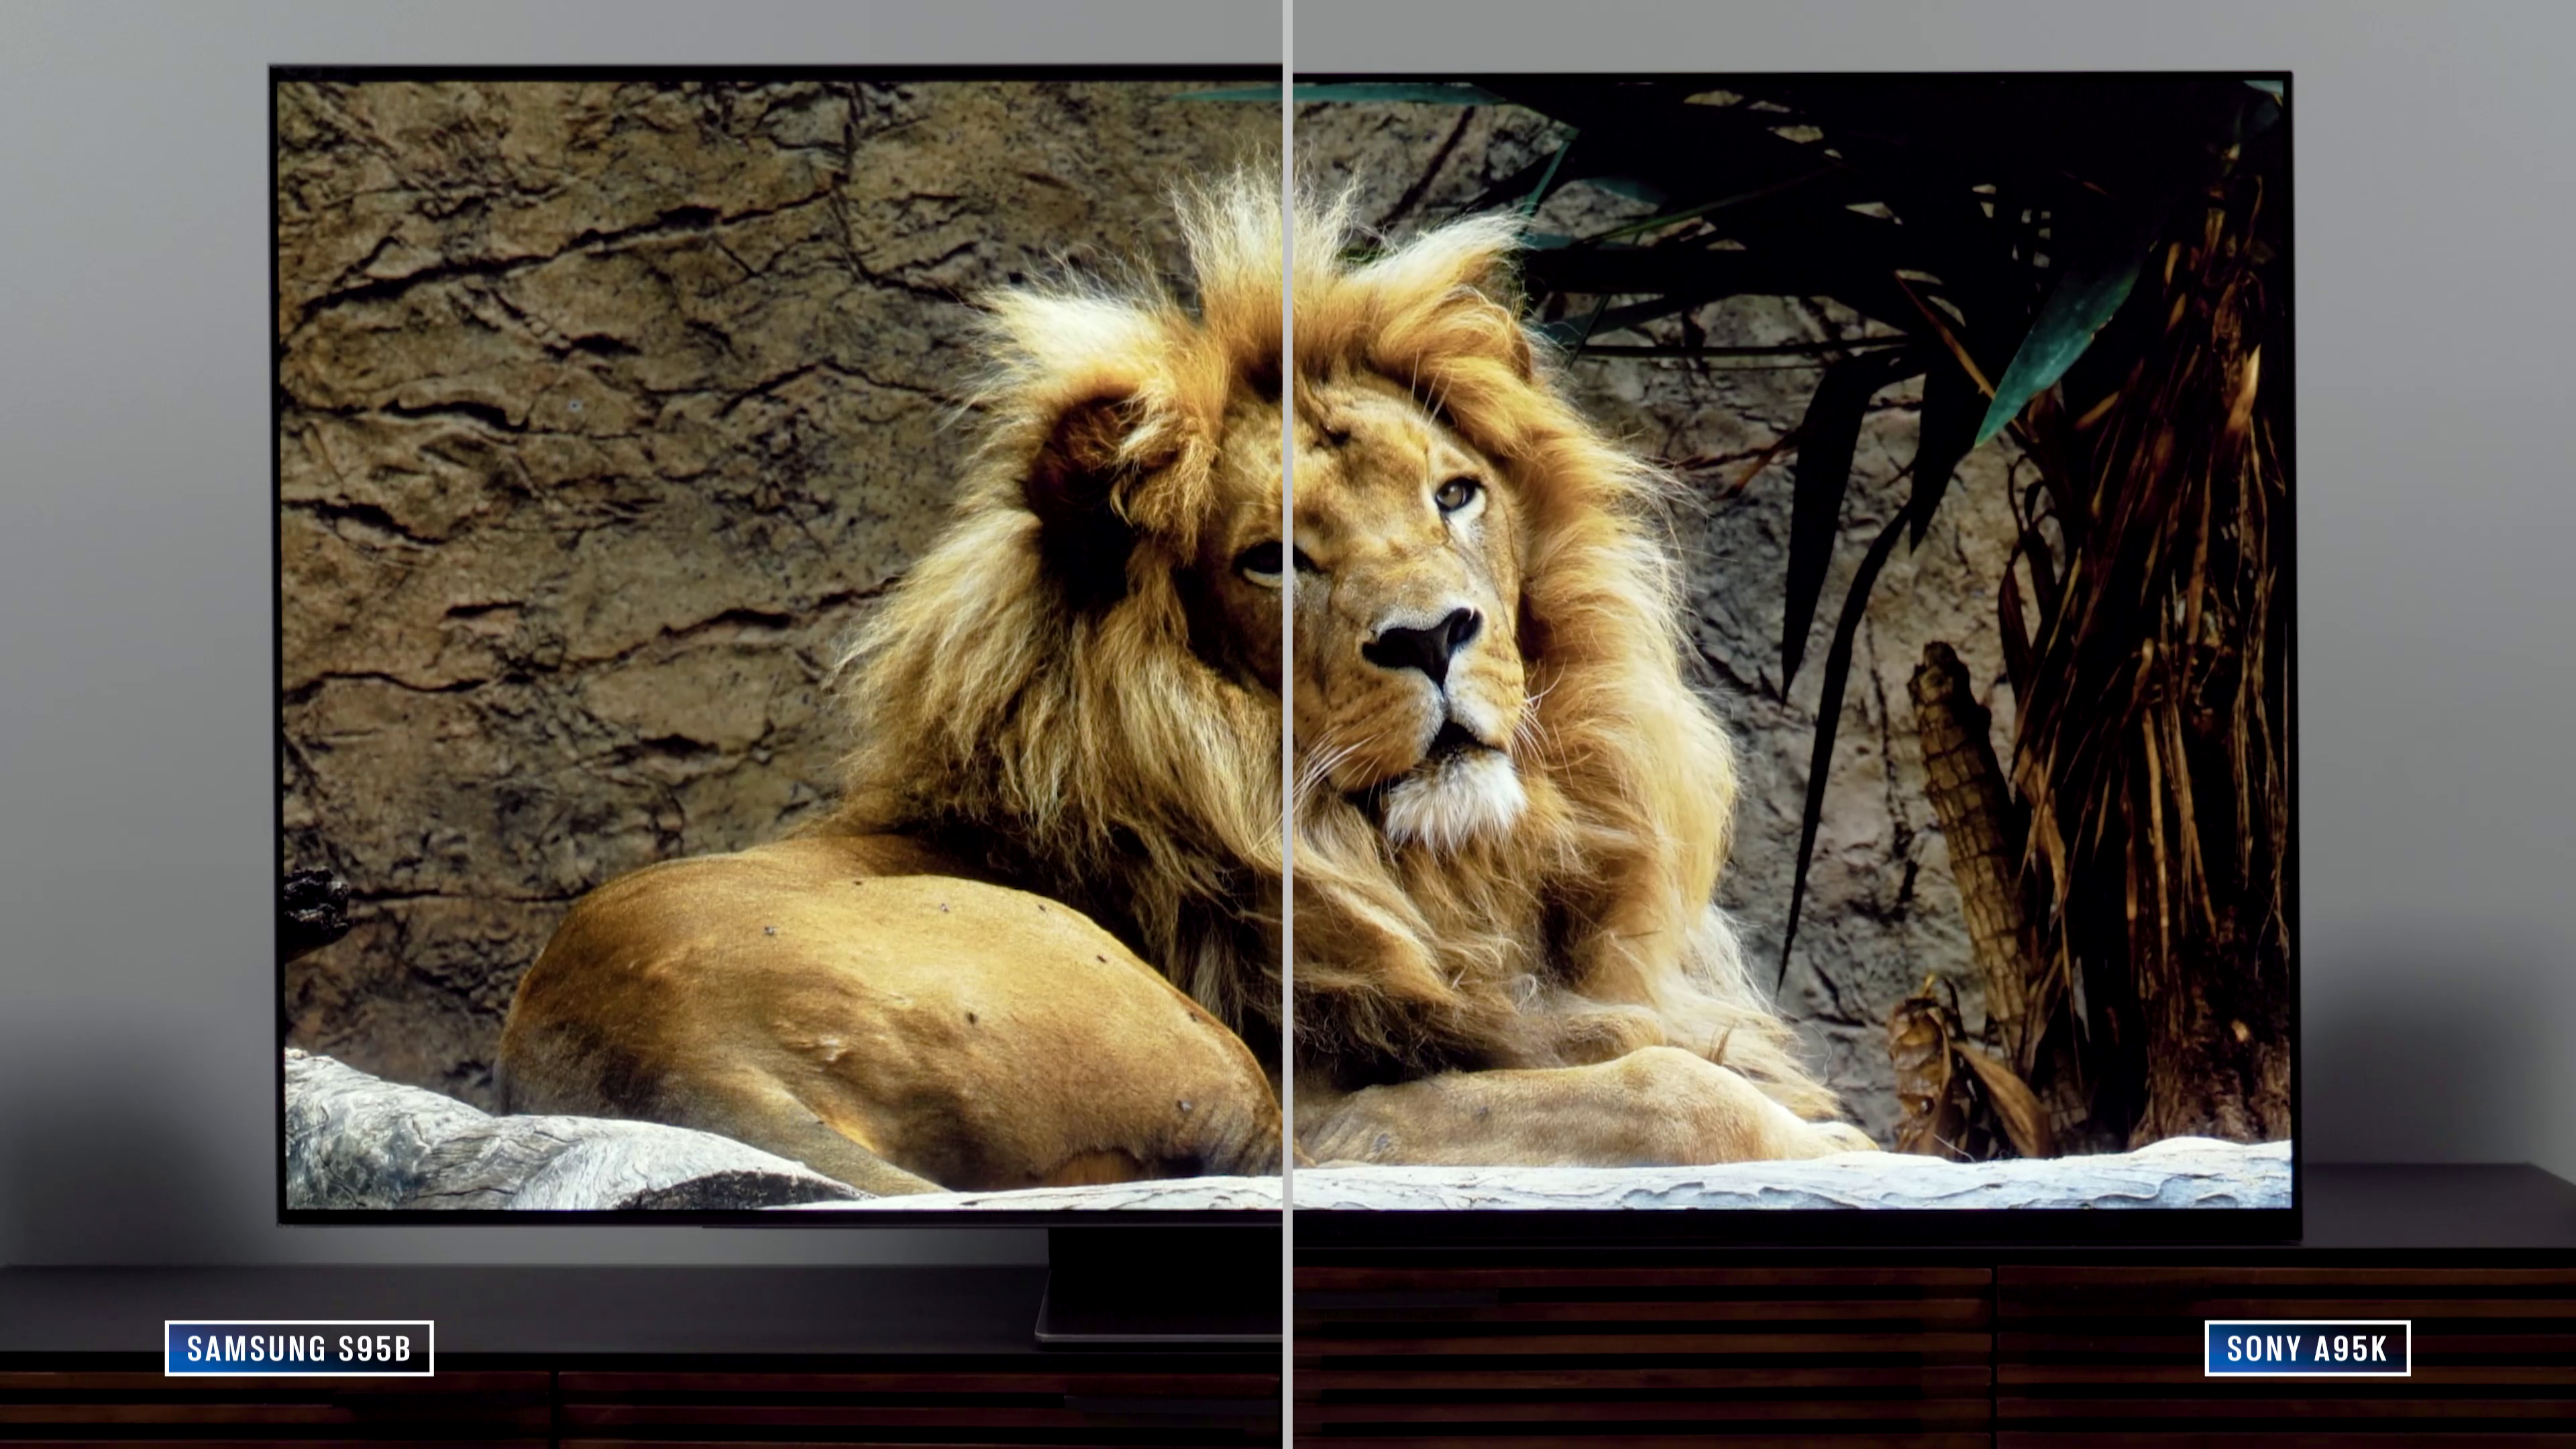 Split screen showing color and brightness differences between two tvs, a lion on screen